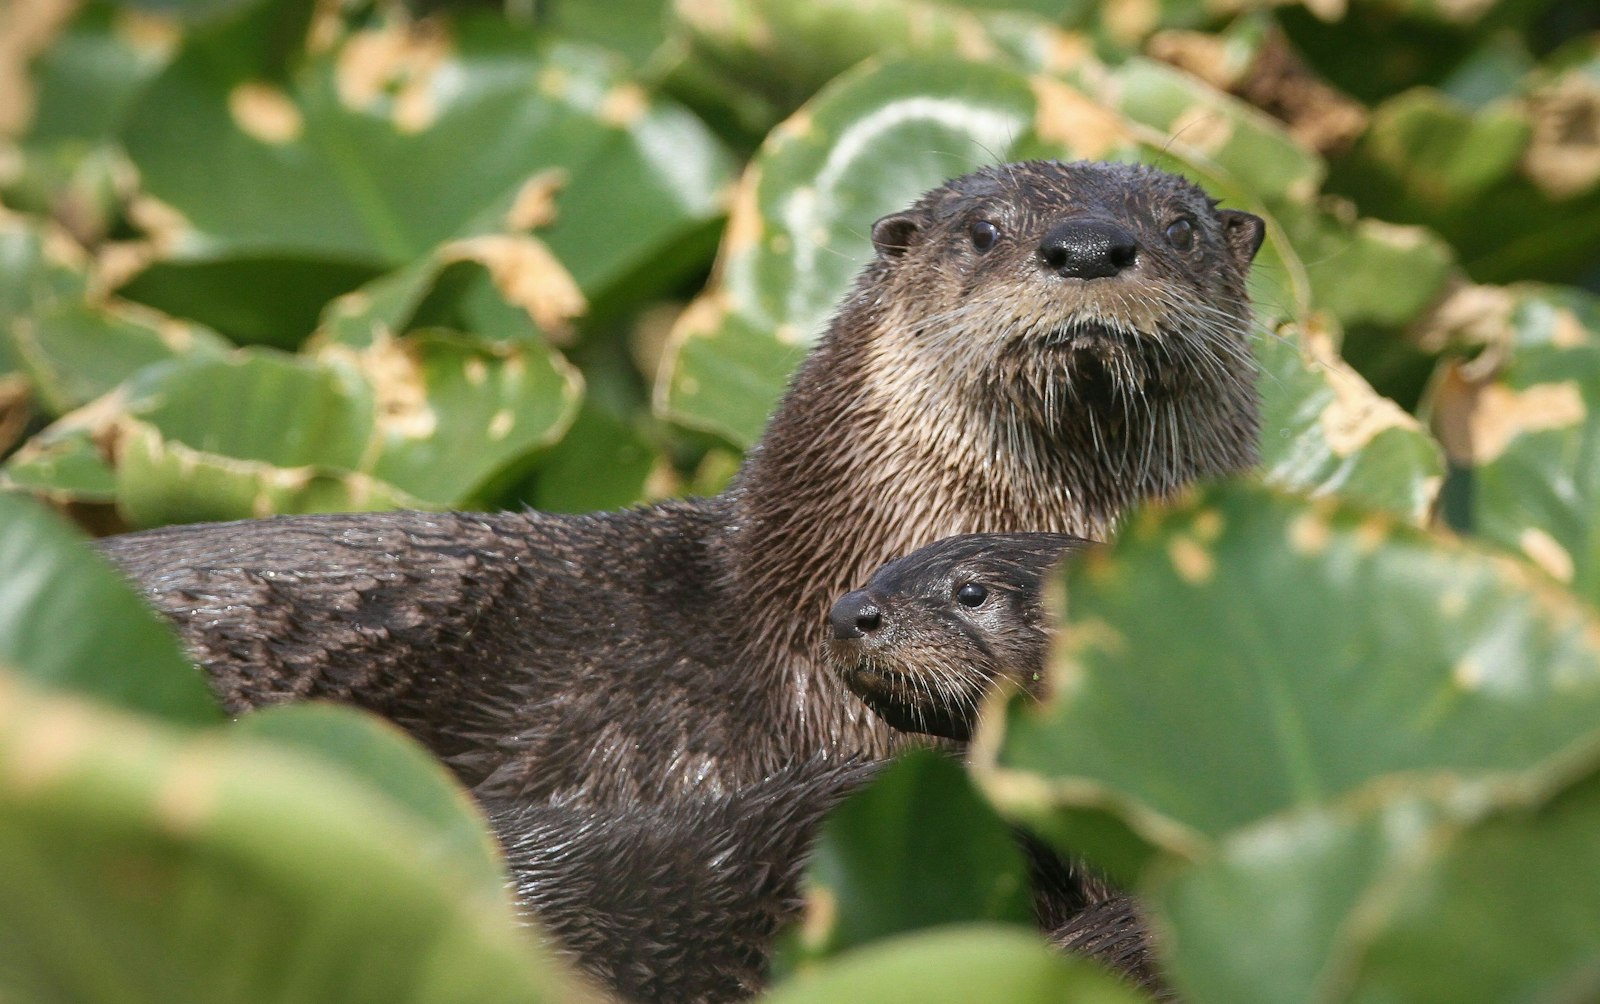 Close up image of a river otter popping up between leafy greenery